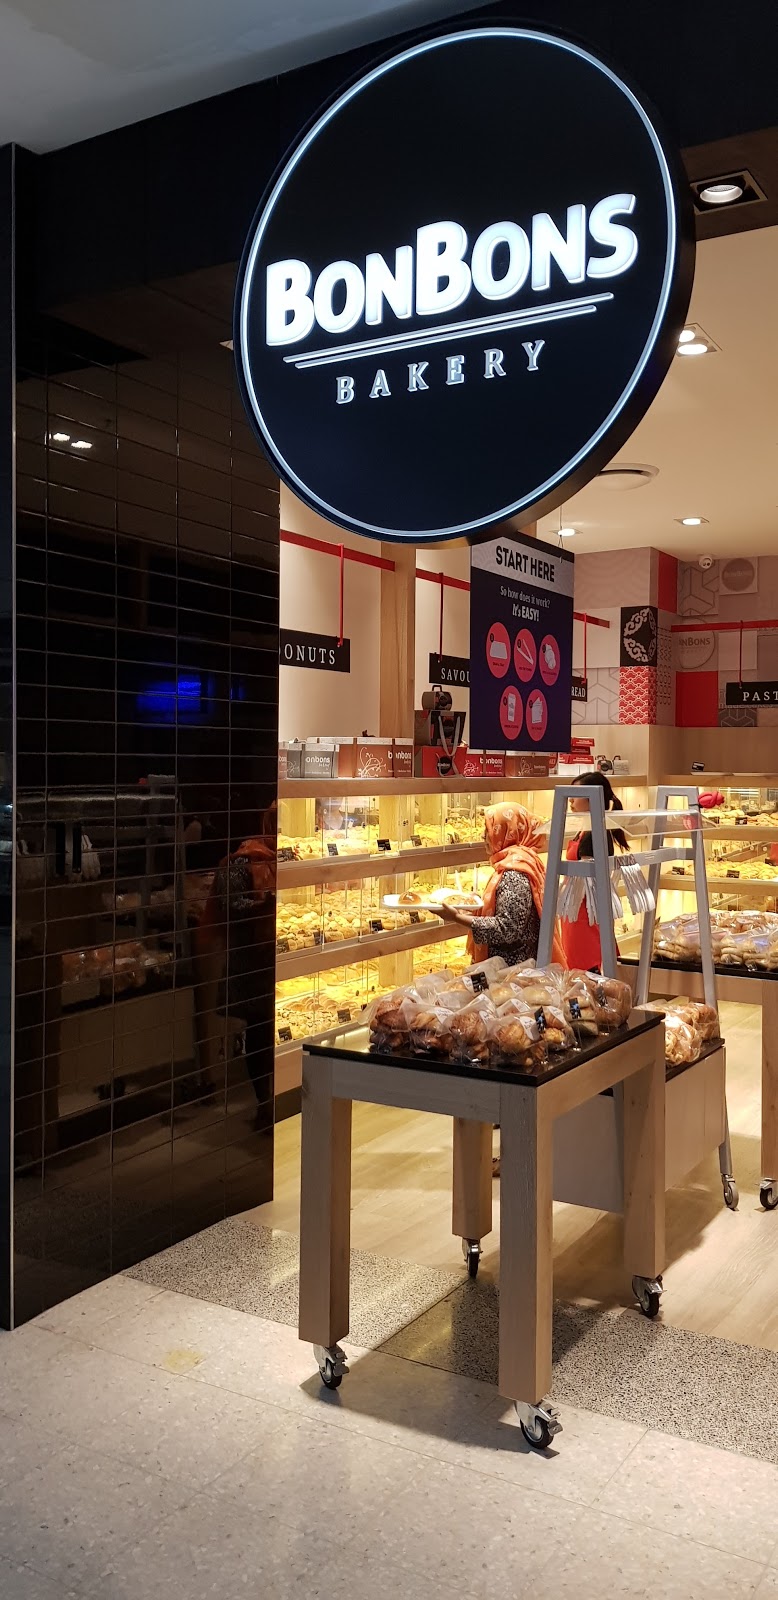 Bonbons Bakery | bakery | Shop SP133 Carlingford Court Shopping Centre Cnr Pennant Hills and, Carlingford Rd, Carlingford NSW 2118, Australia | 0298736515 OR +61 2 9873 6515